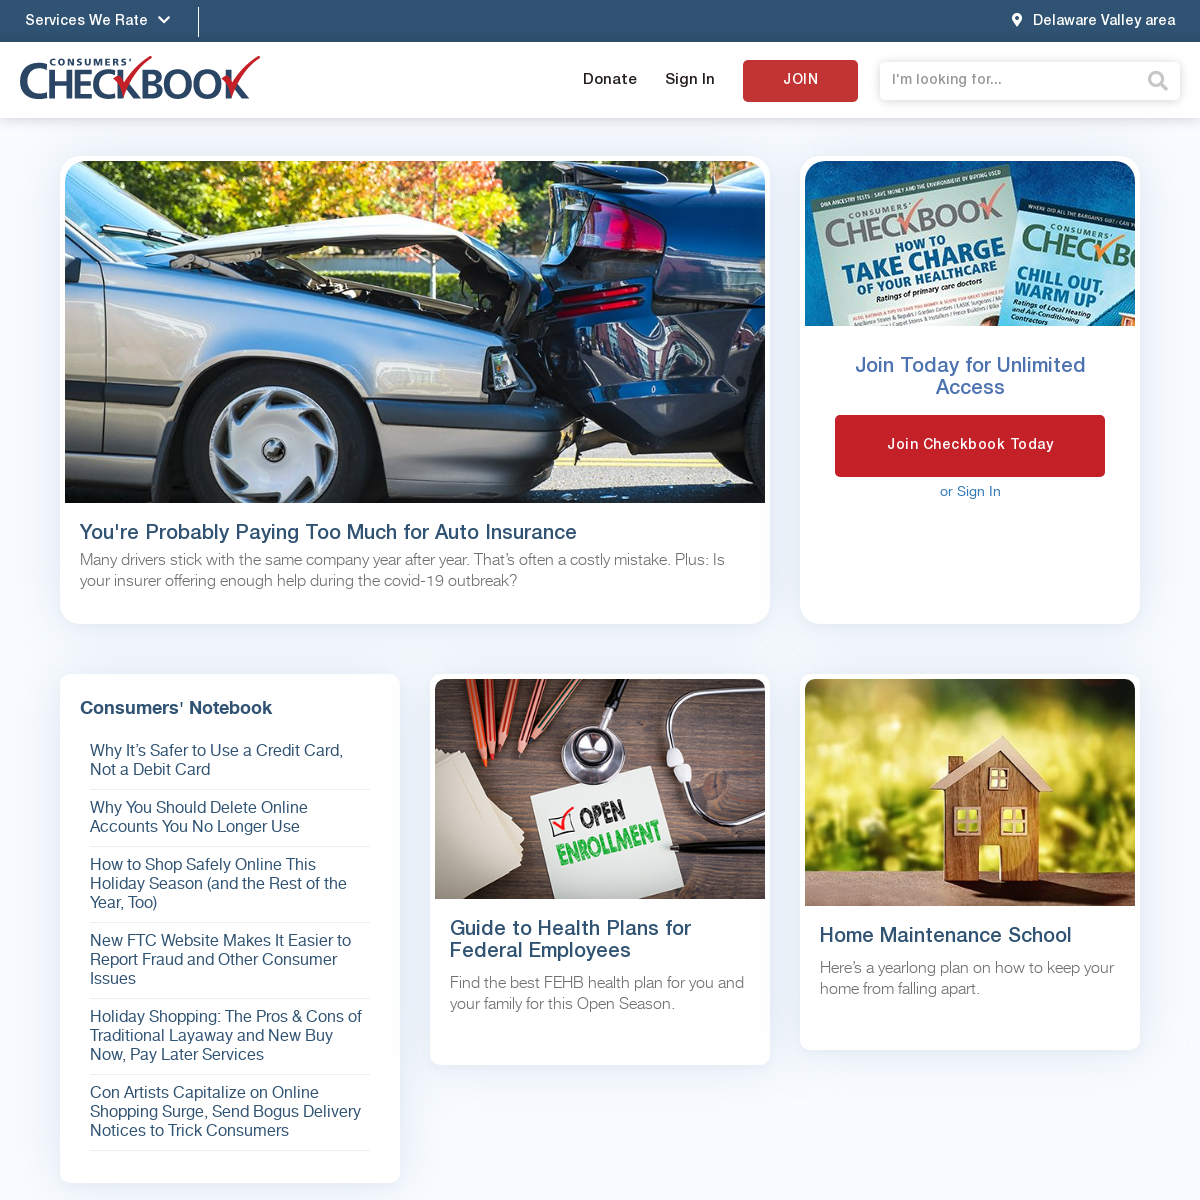 A complete backup of checkbook.org